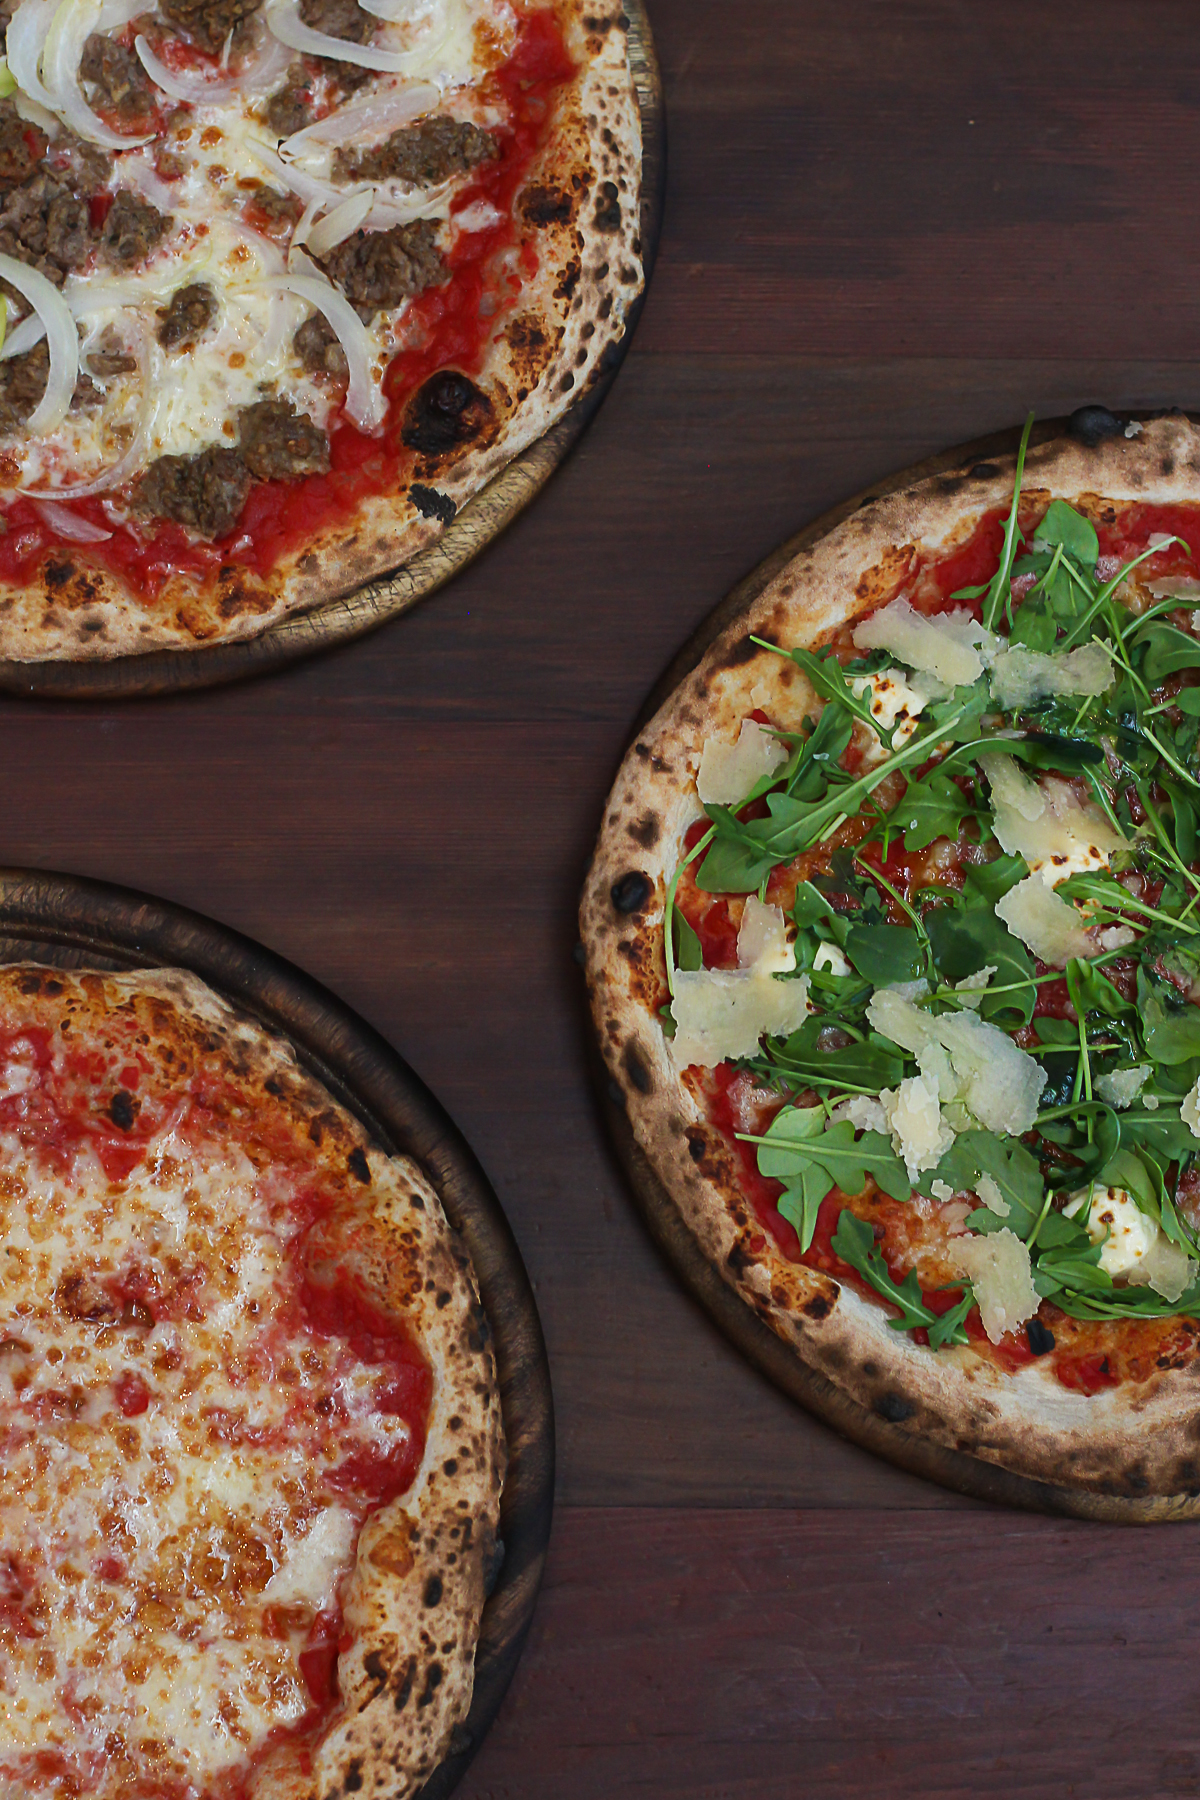 In the Food Garden, Ca’ Momi will offer three pizzas: Crumbled sausage and organic raw onion, four cheese, and arugula and mascarpone.